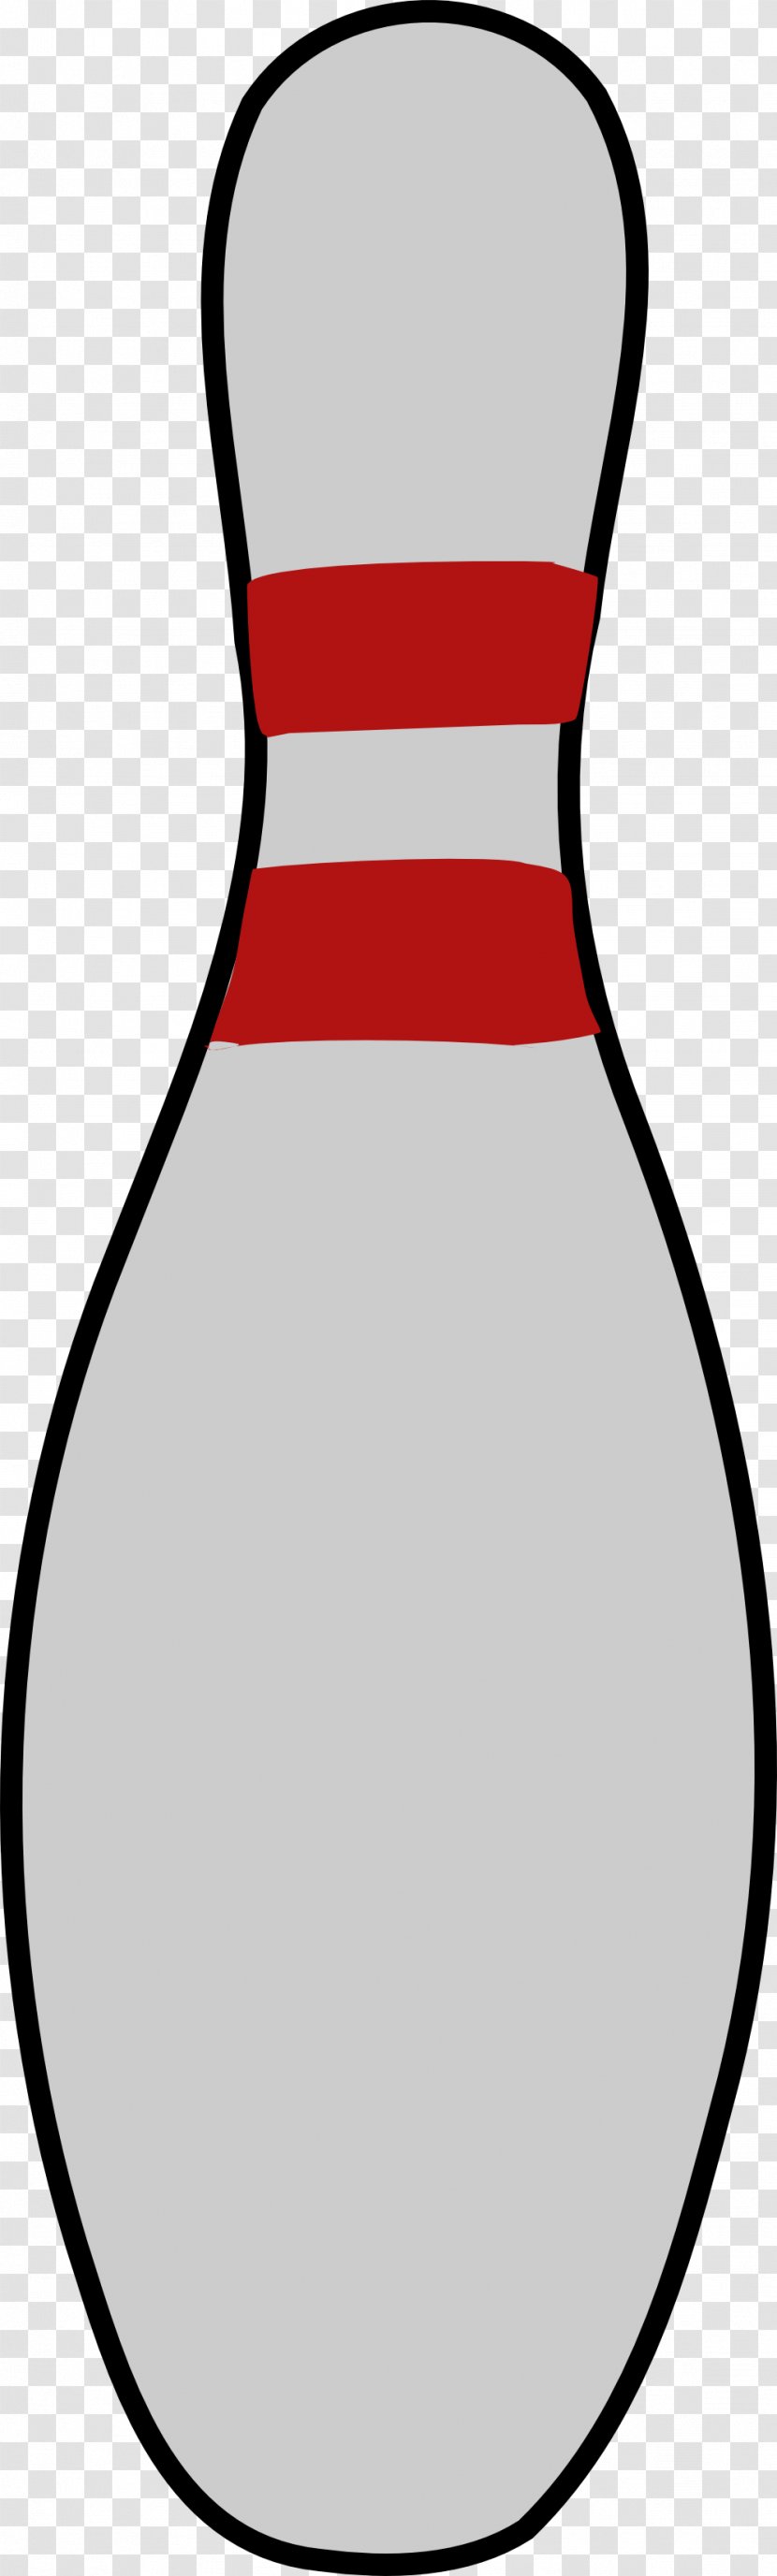 Bowling Pin Ball Clip Art - Tenpin - Pins Pictures Transparent PNG